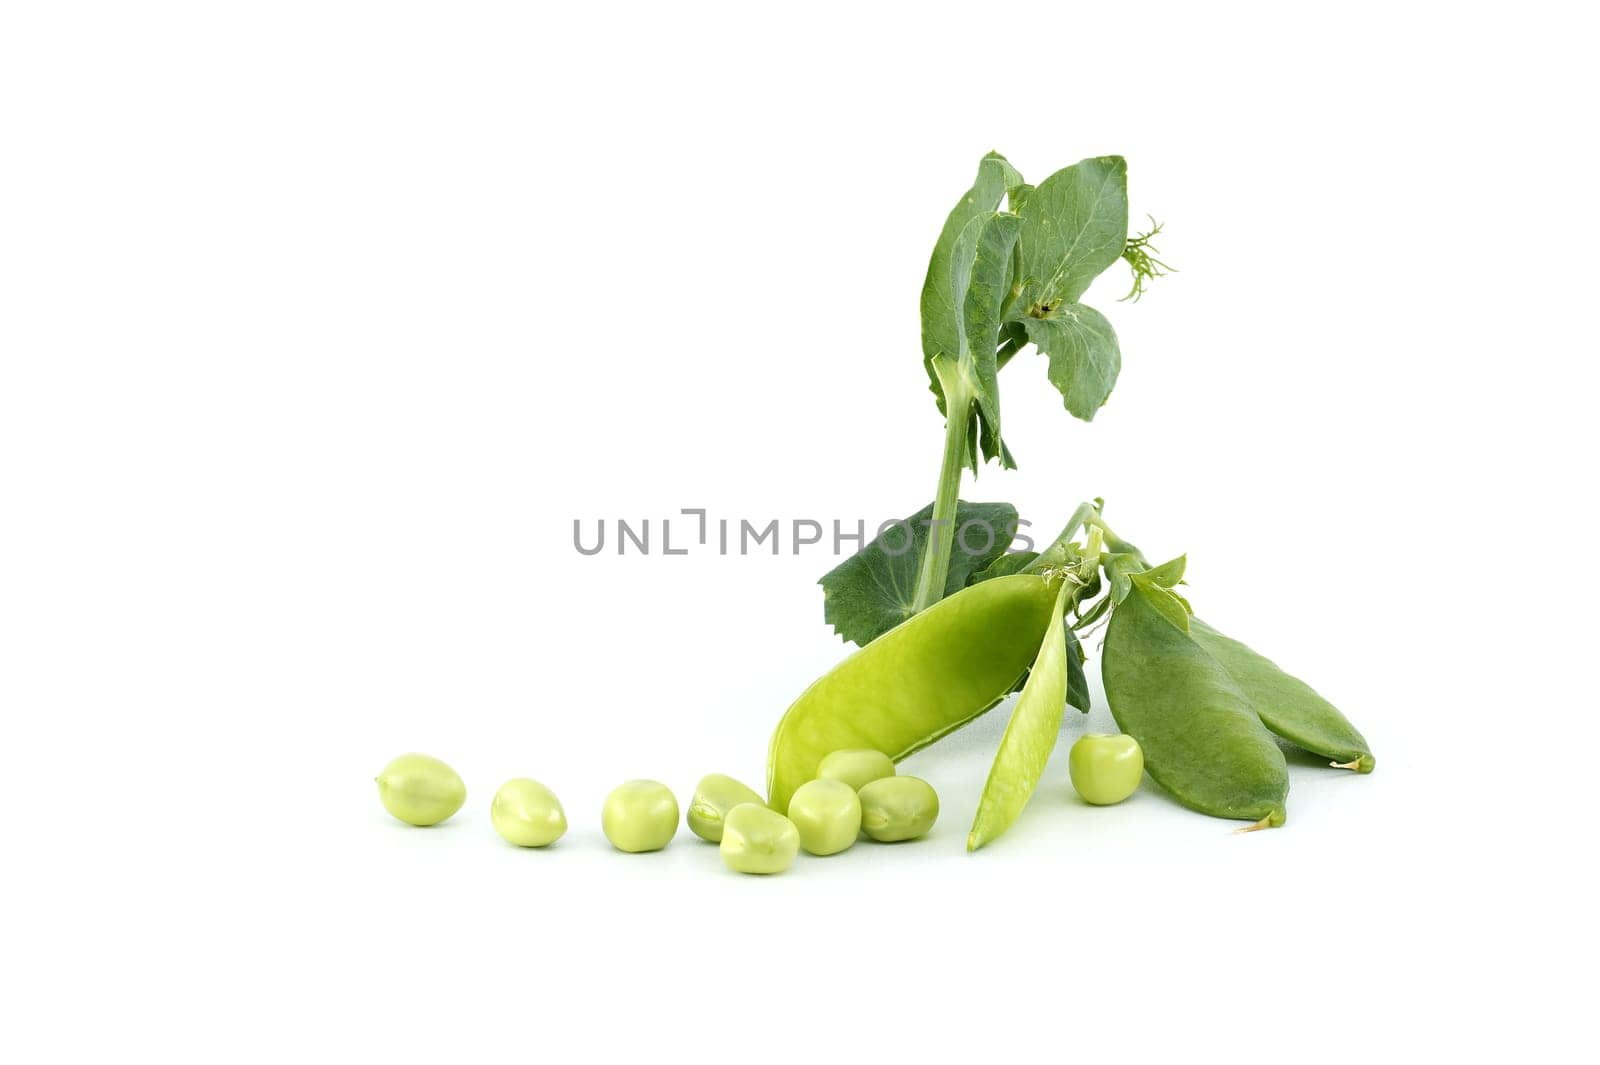 English peas pods with green leaves isolated on white by NetPix